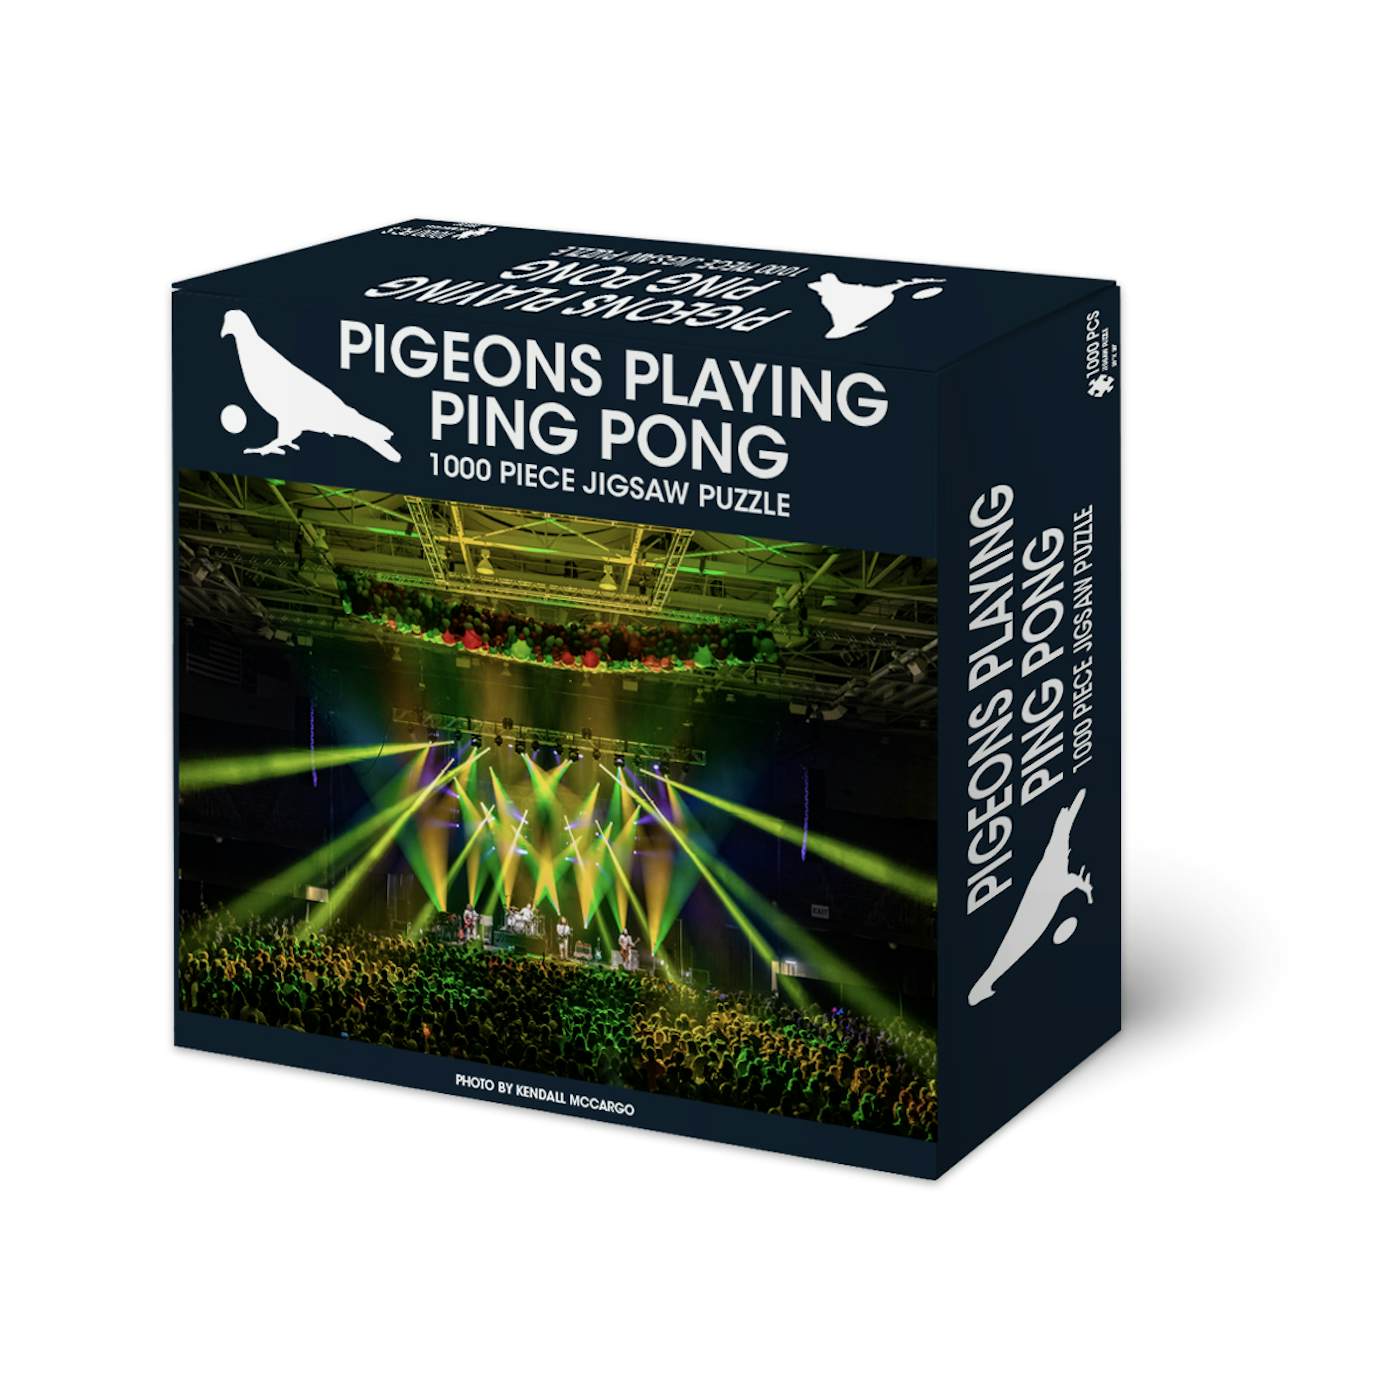 Pigeons Playing Ping Pong 1000 Piece Jigsaw Puzzle